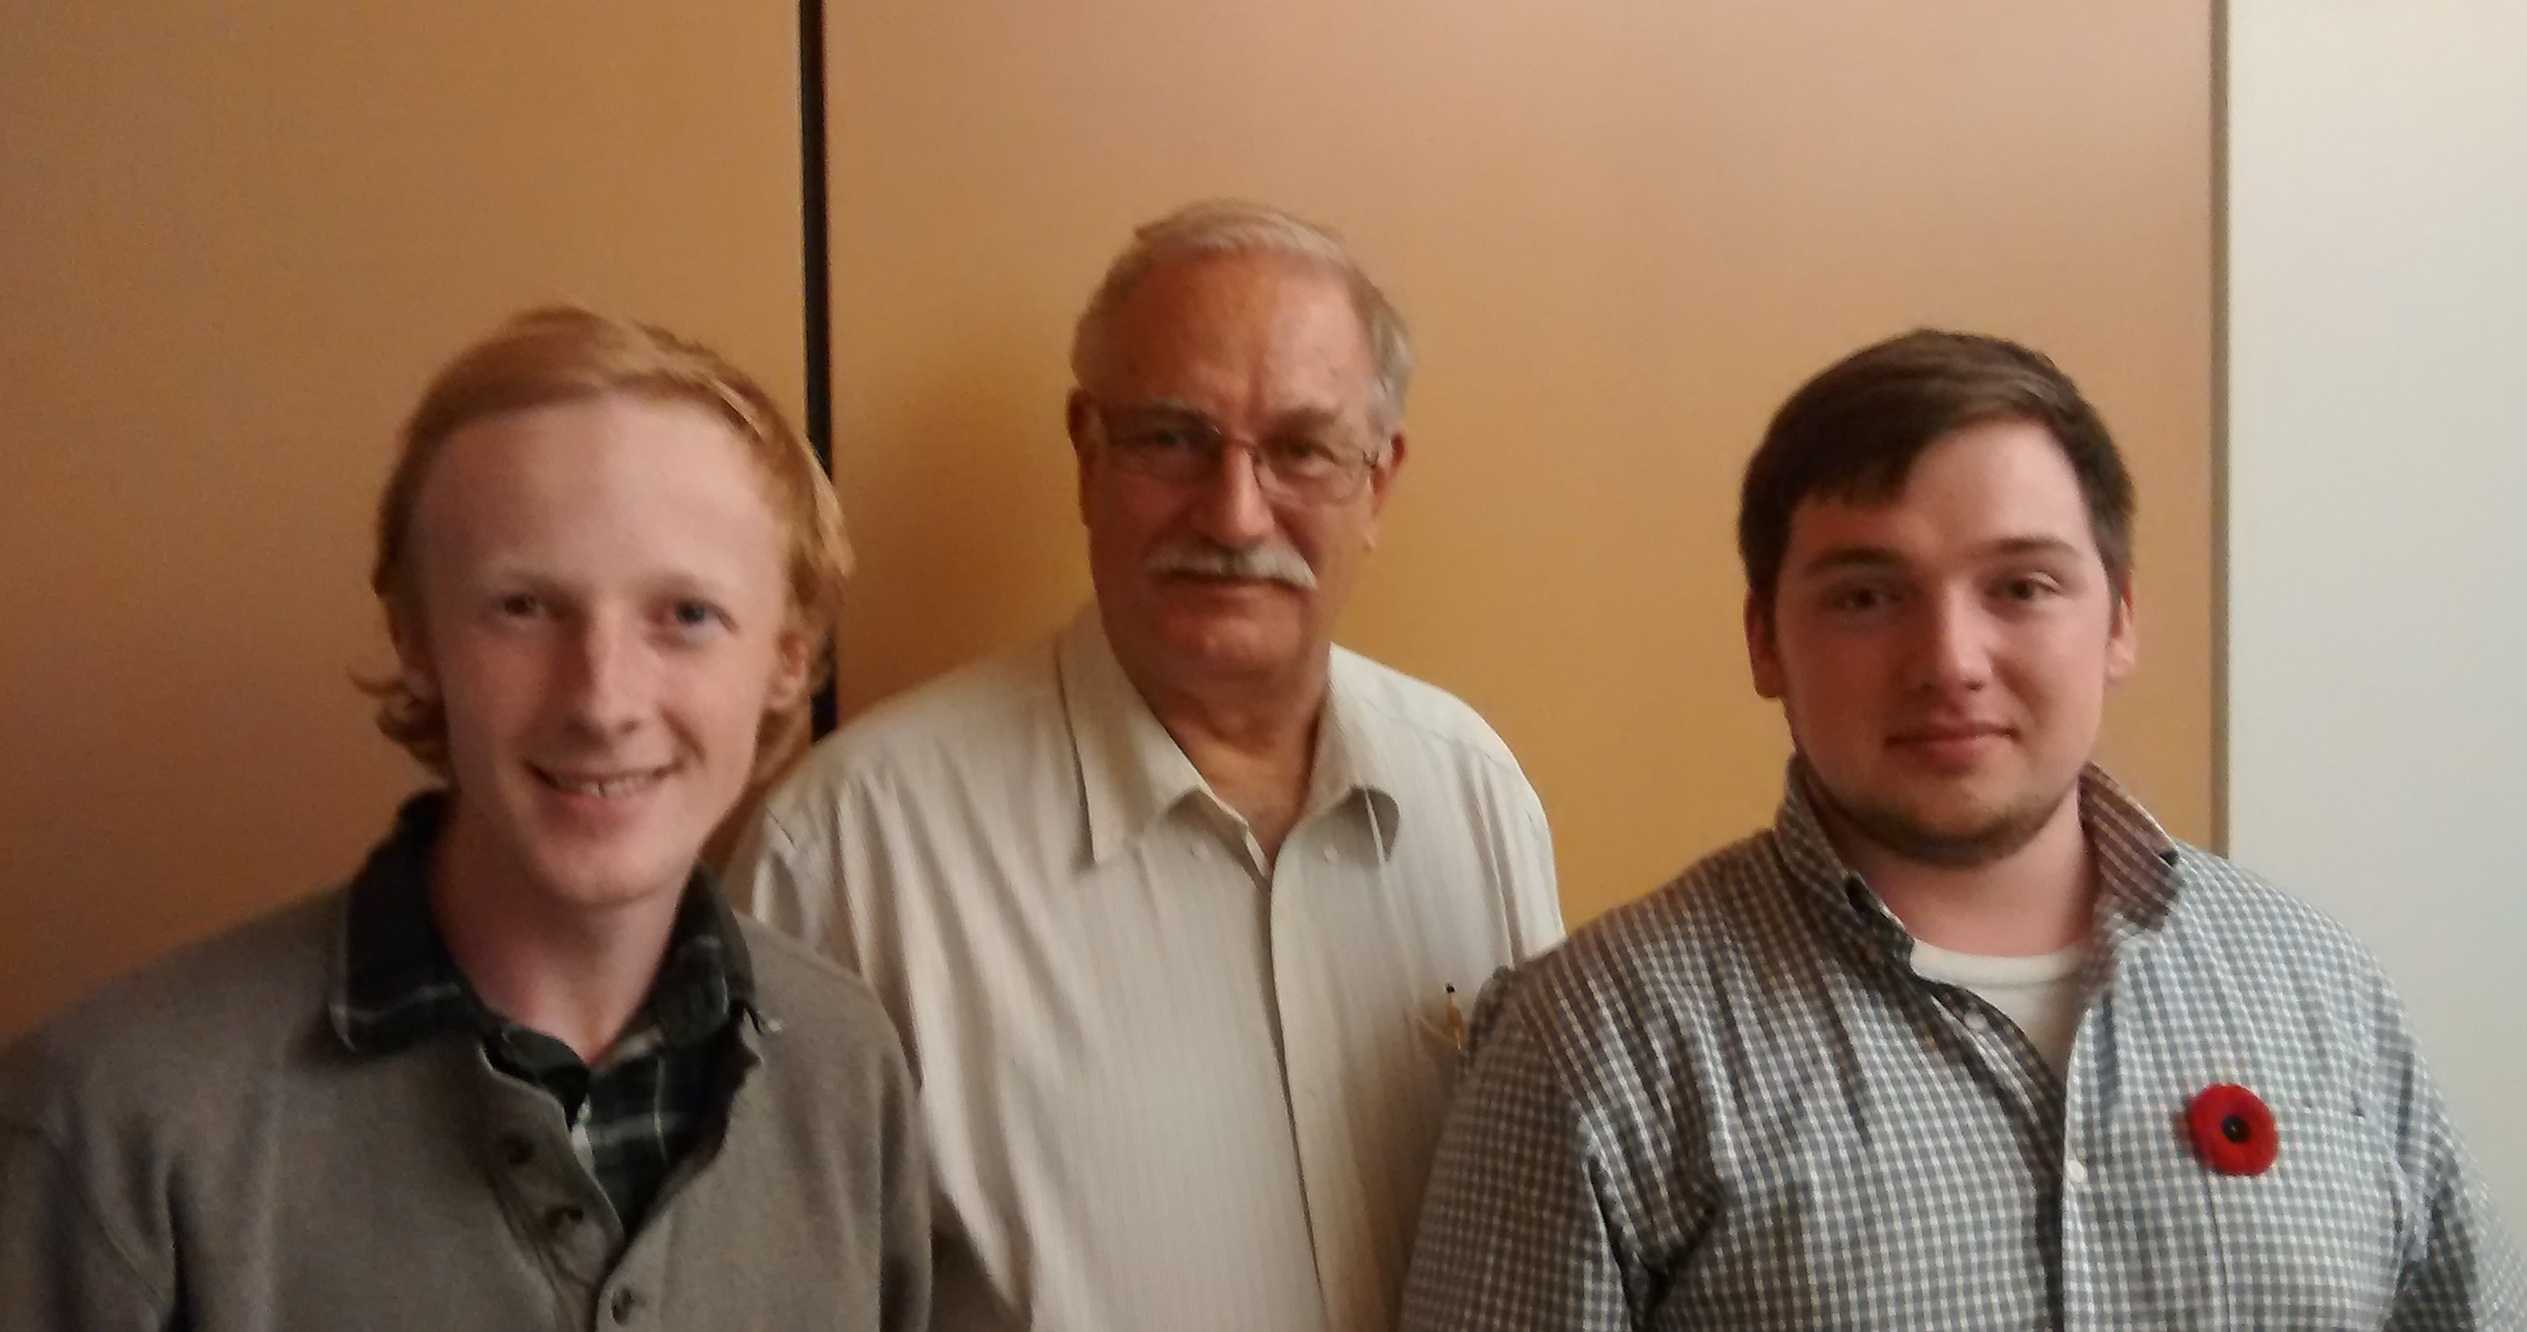 UVic students Matthew Griffiths (L), BCGS Scholarship recipient, and Collin Paul (R), KEGS Pioneers Scholarship recipient, at Nov 3 Special Lecture event with presenter and Foundation Director Peter Kowalczyk.